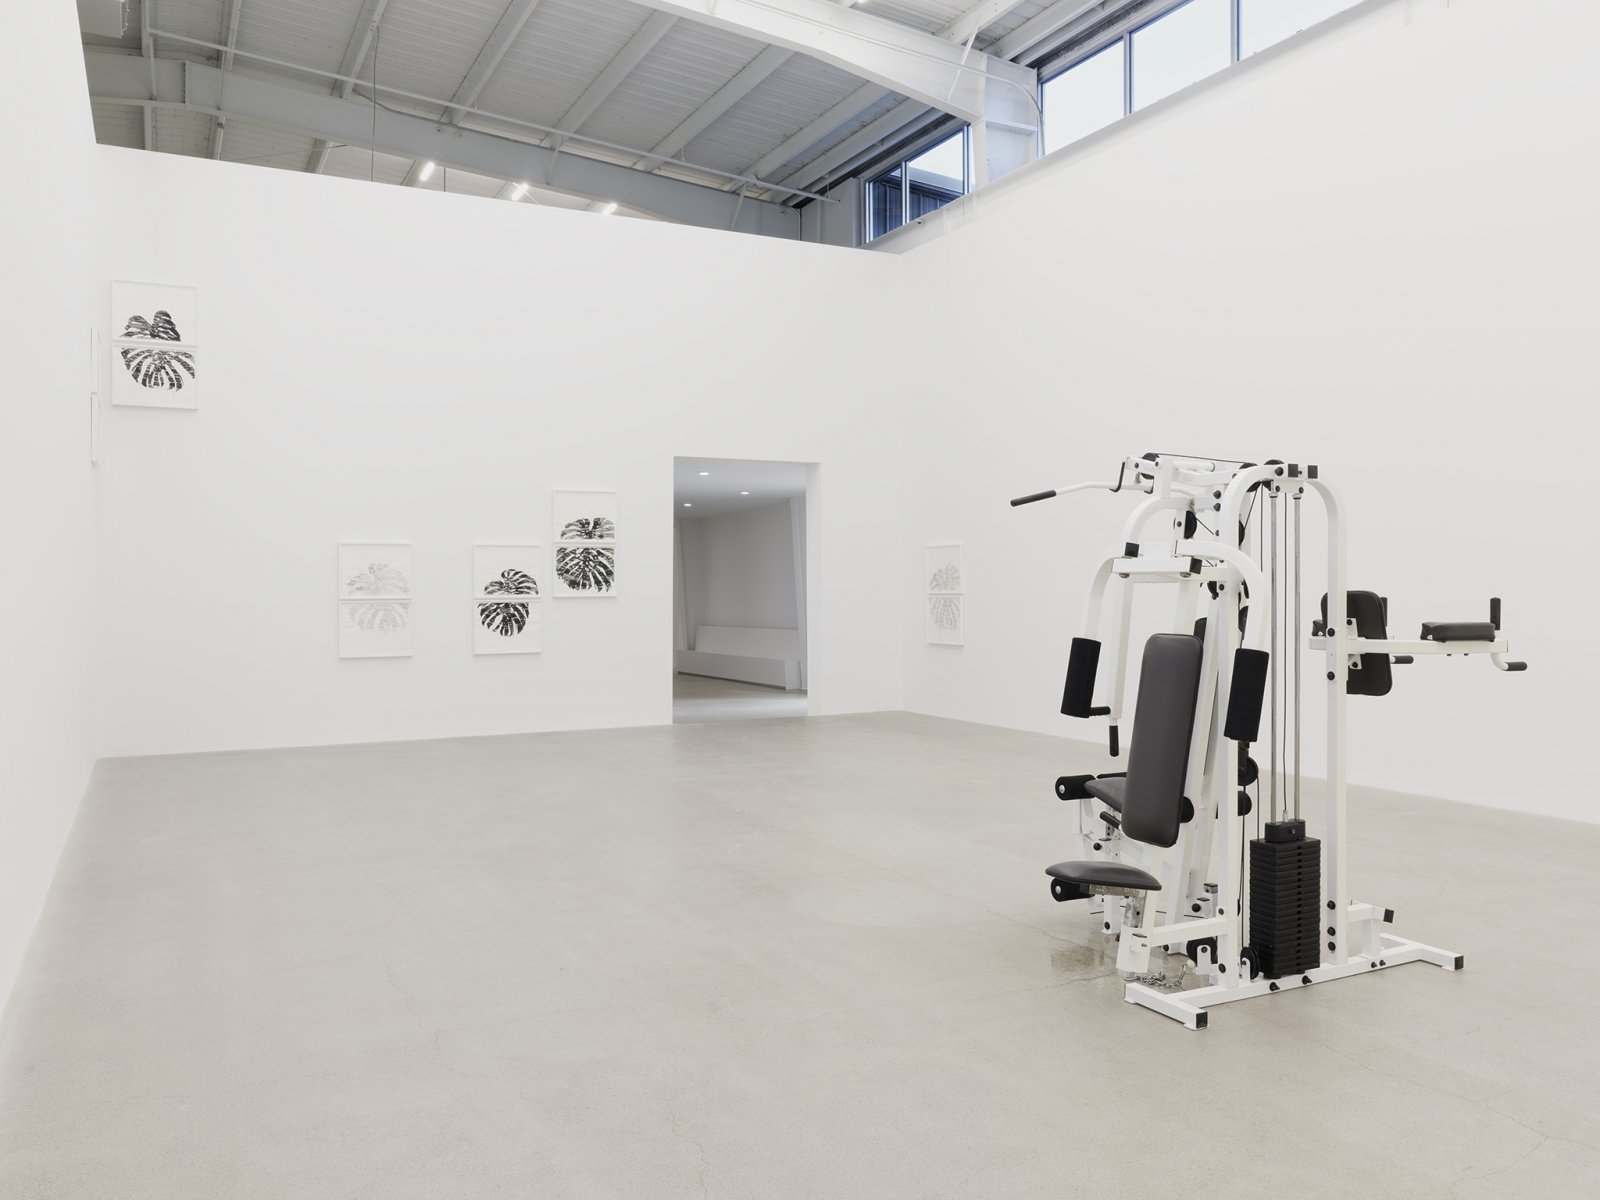 Abbas Akhavan, not titled, 2019, gym equipment, misting system, automatic water timer, water, installation dimensions variable by Abbas Akhavan